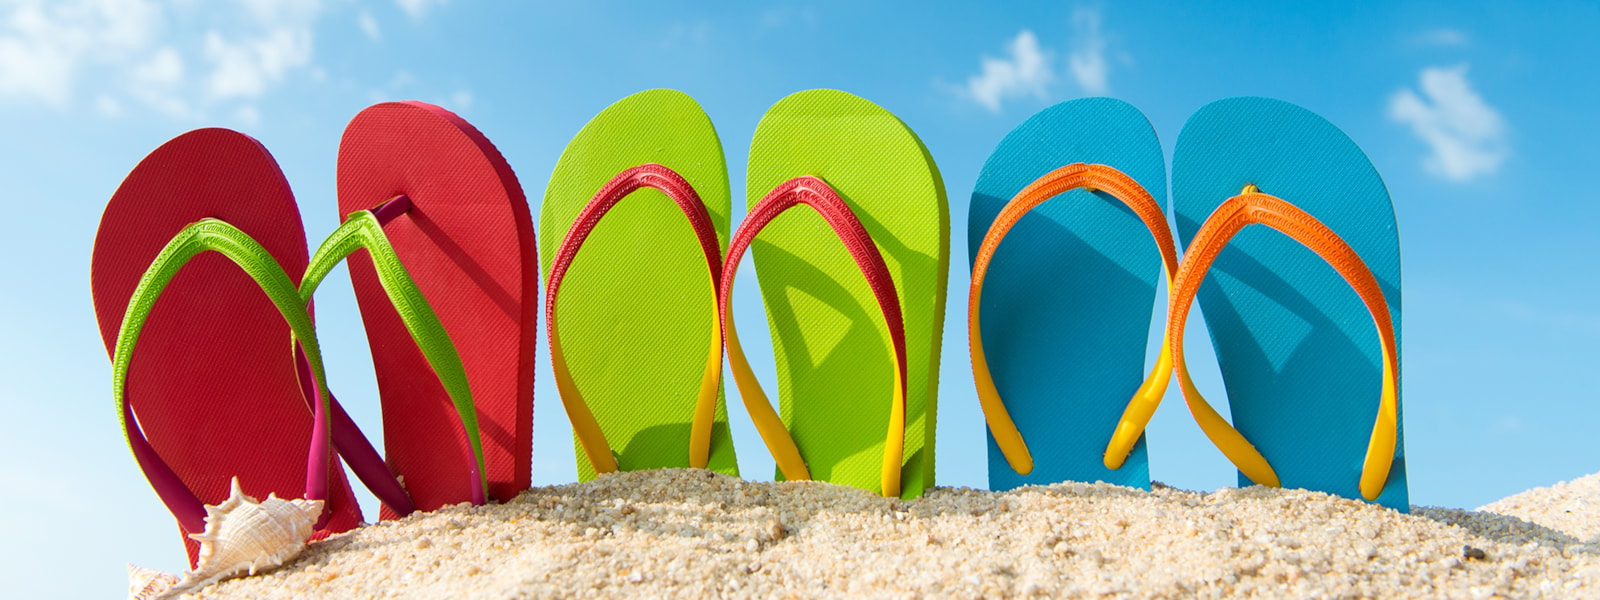 colorful flip flop shoes in the sand with a blue sky in the background